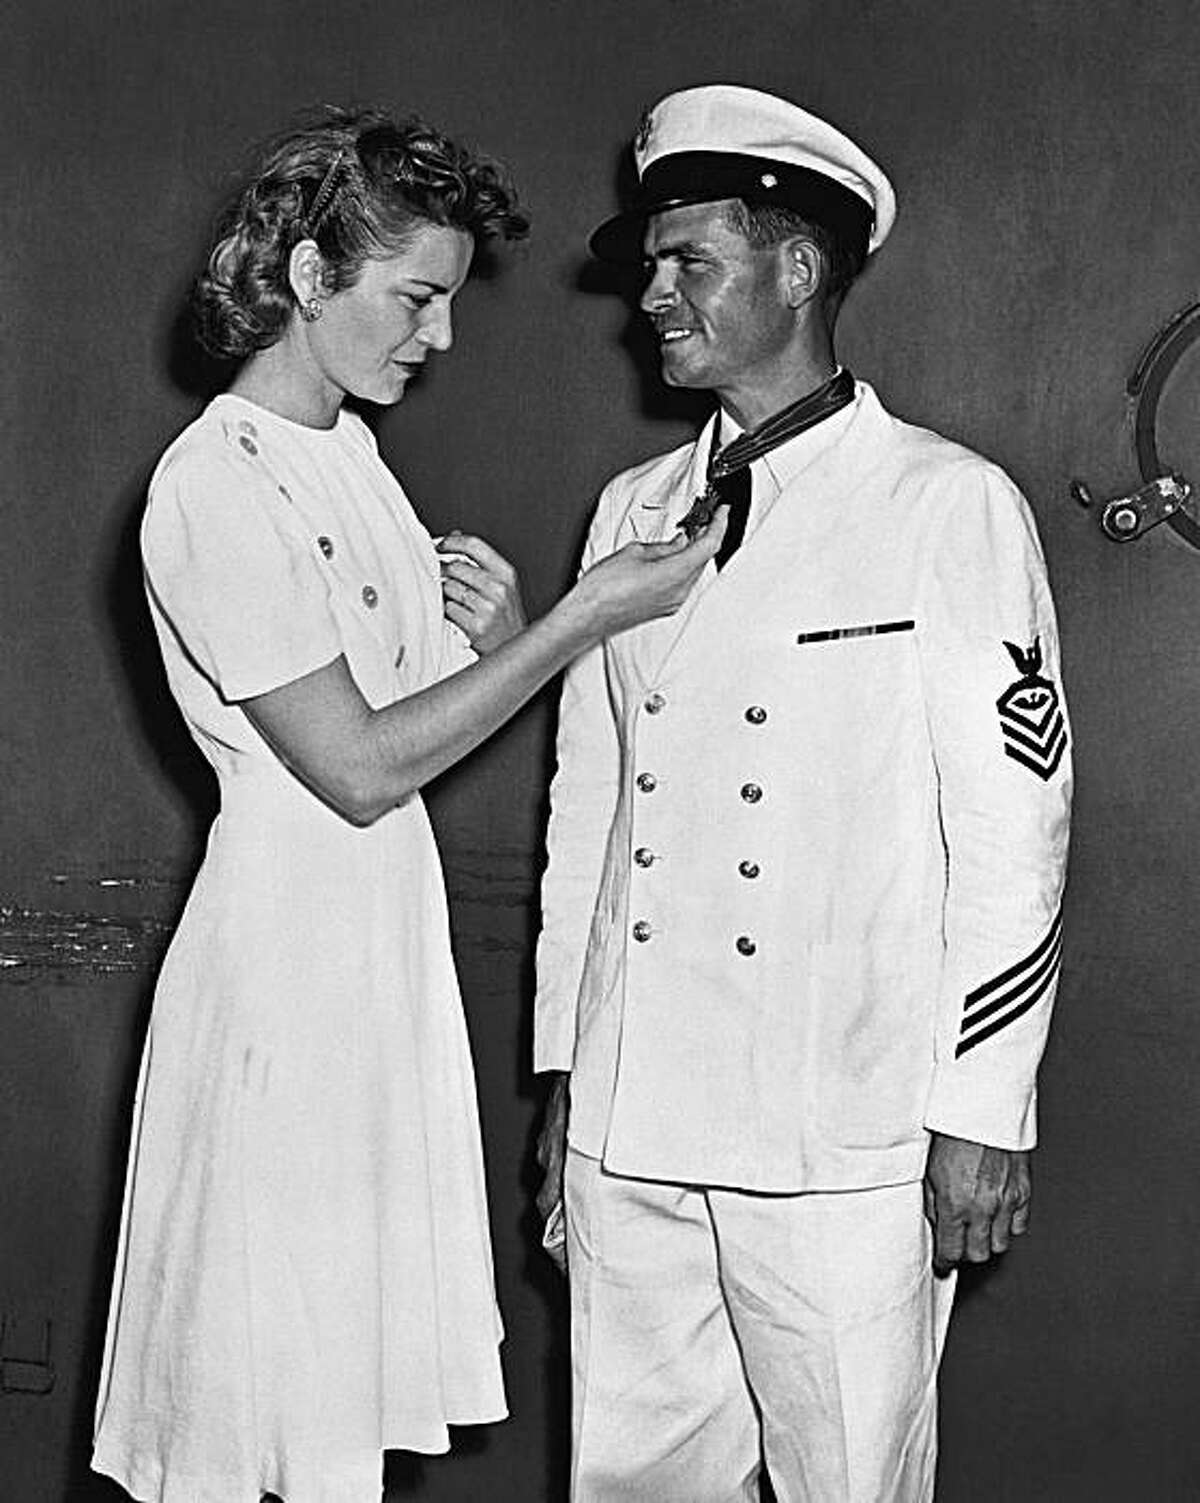 FILE - In this Sept. 28, 1942 photo provided by the U.S. Navy, Chief Ordnanceman John W. Finn is congratulated by his wife Alice at Pearl Harbor, Hawaii, after he was awarded the Congressional Medal of Honor or heroism at Kaneohe Naval Air Station for hisactions during the attack on Pearl Harbor. Finn, the oldest Medal of Honor recipient from World War II, died Thursday May 27, 2010 at his San Diego-area home at age 100.